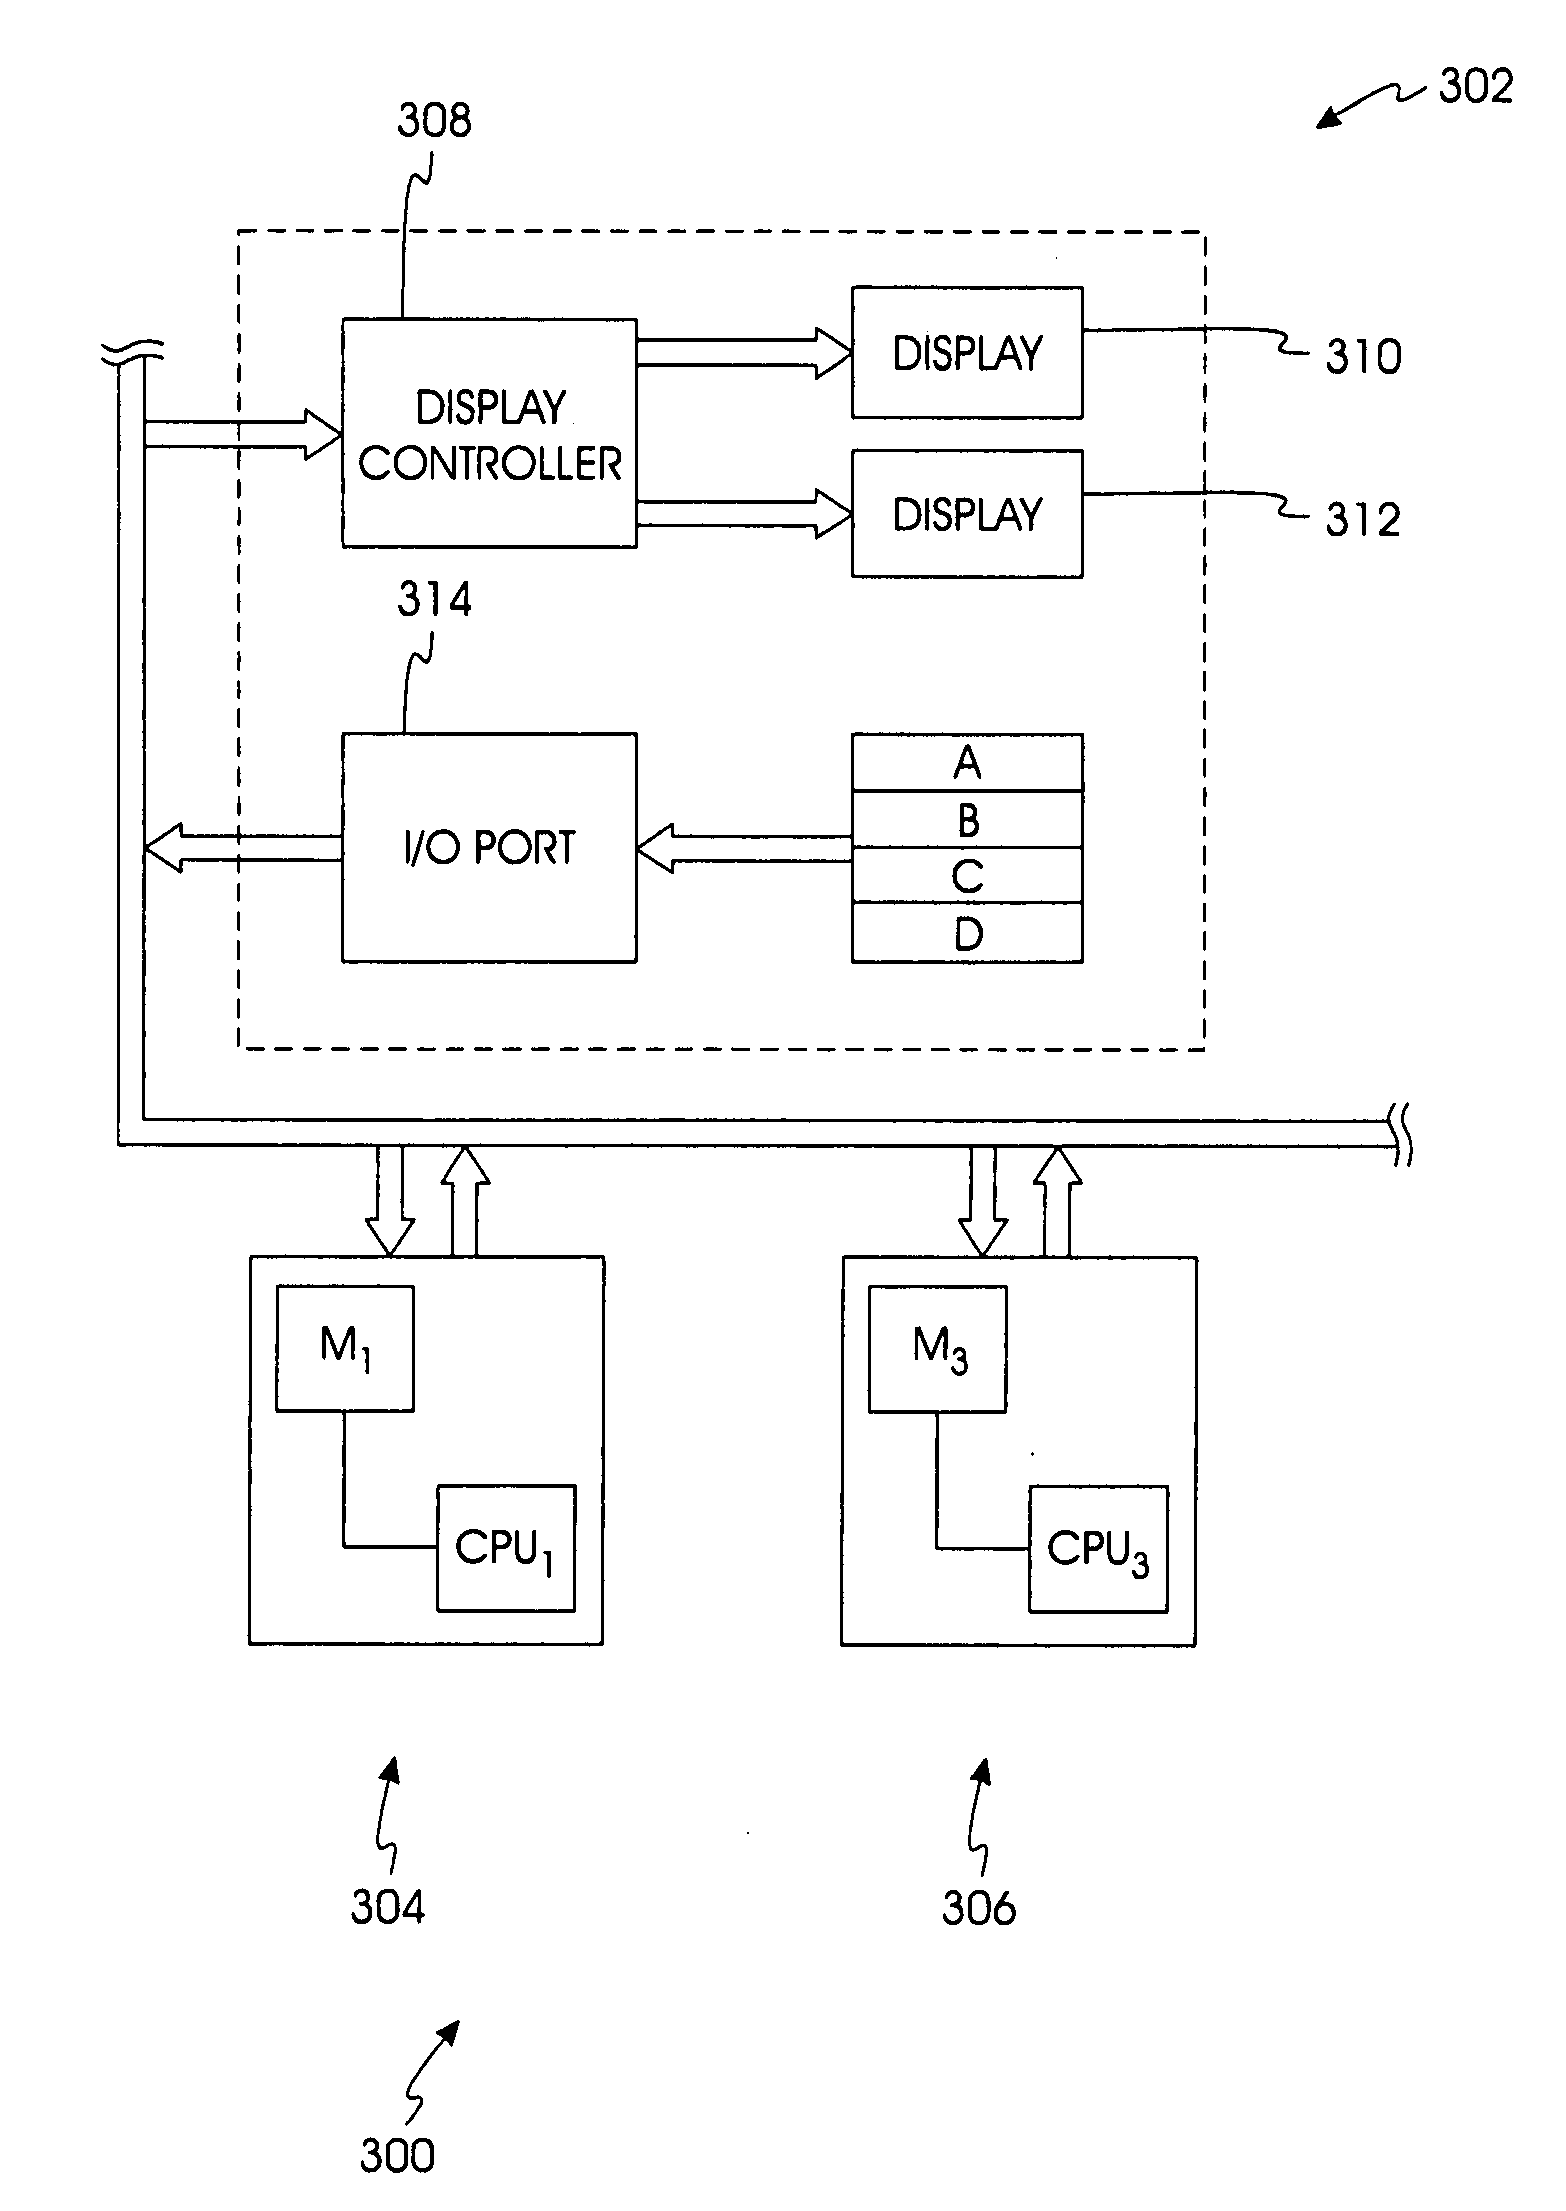 Remote display chain for mutiple user interface applications